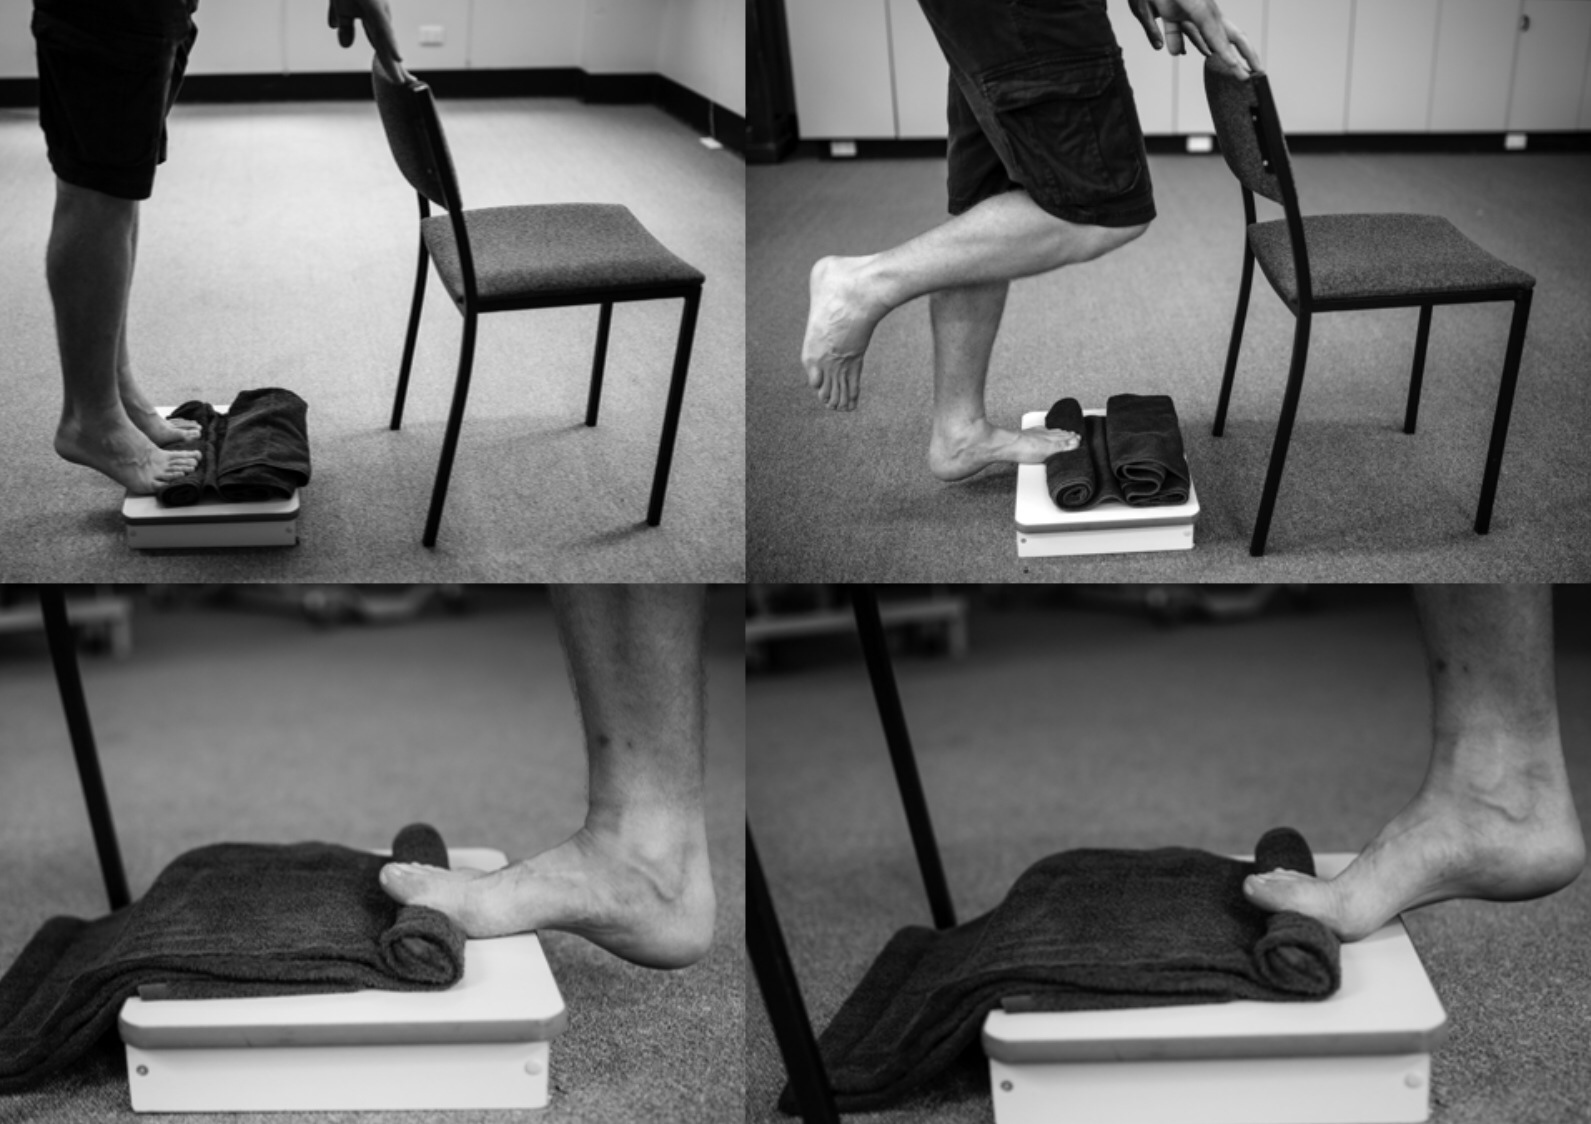 PDF] Plantar fascia-specific stretching exercise improves outcomes in  patients with chronic plantar fasciitis. A prospective clinical trial with  two-year follow-up.